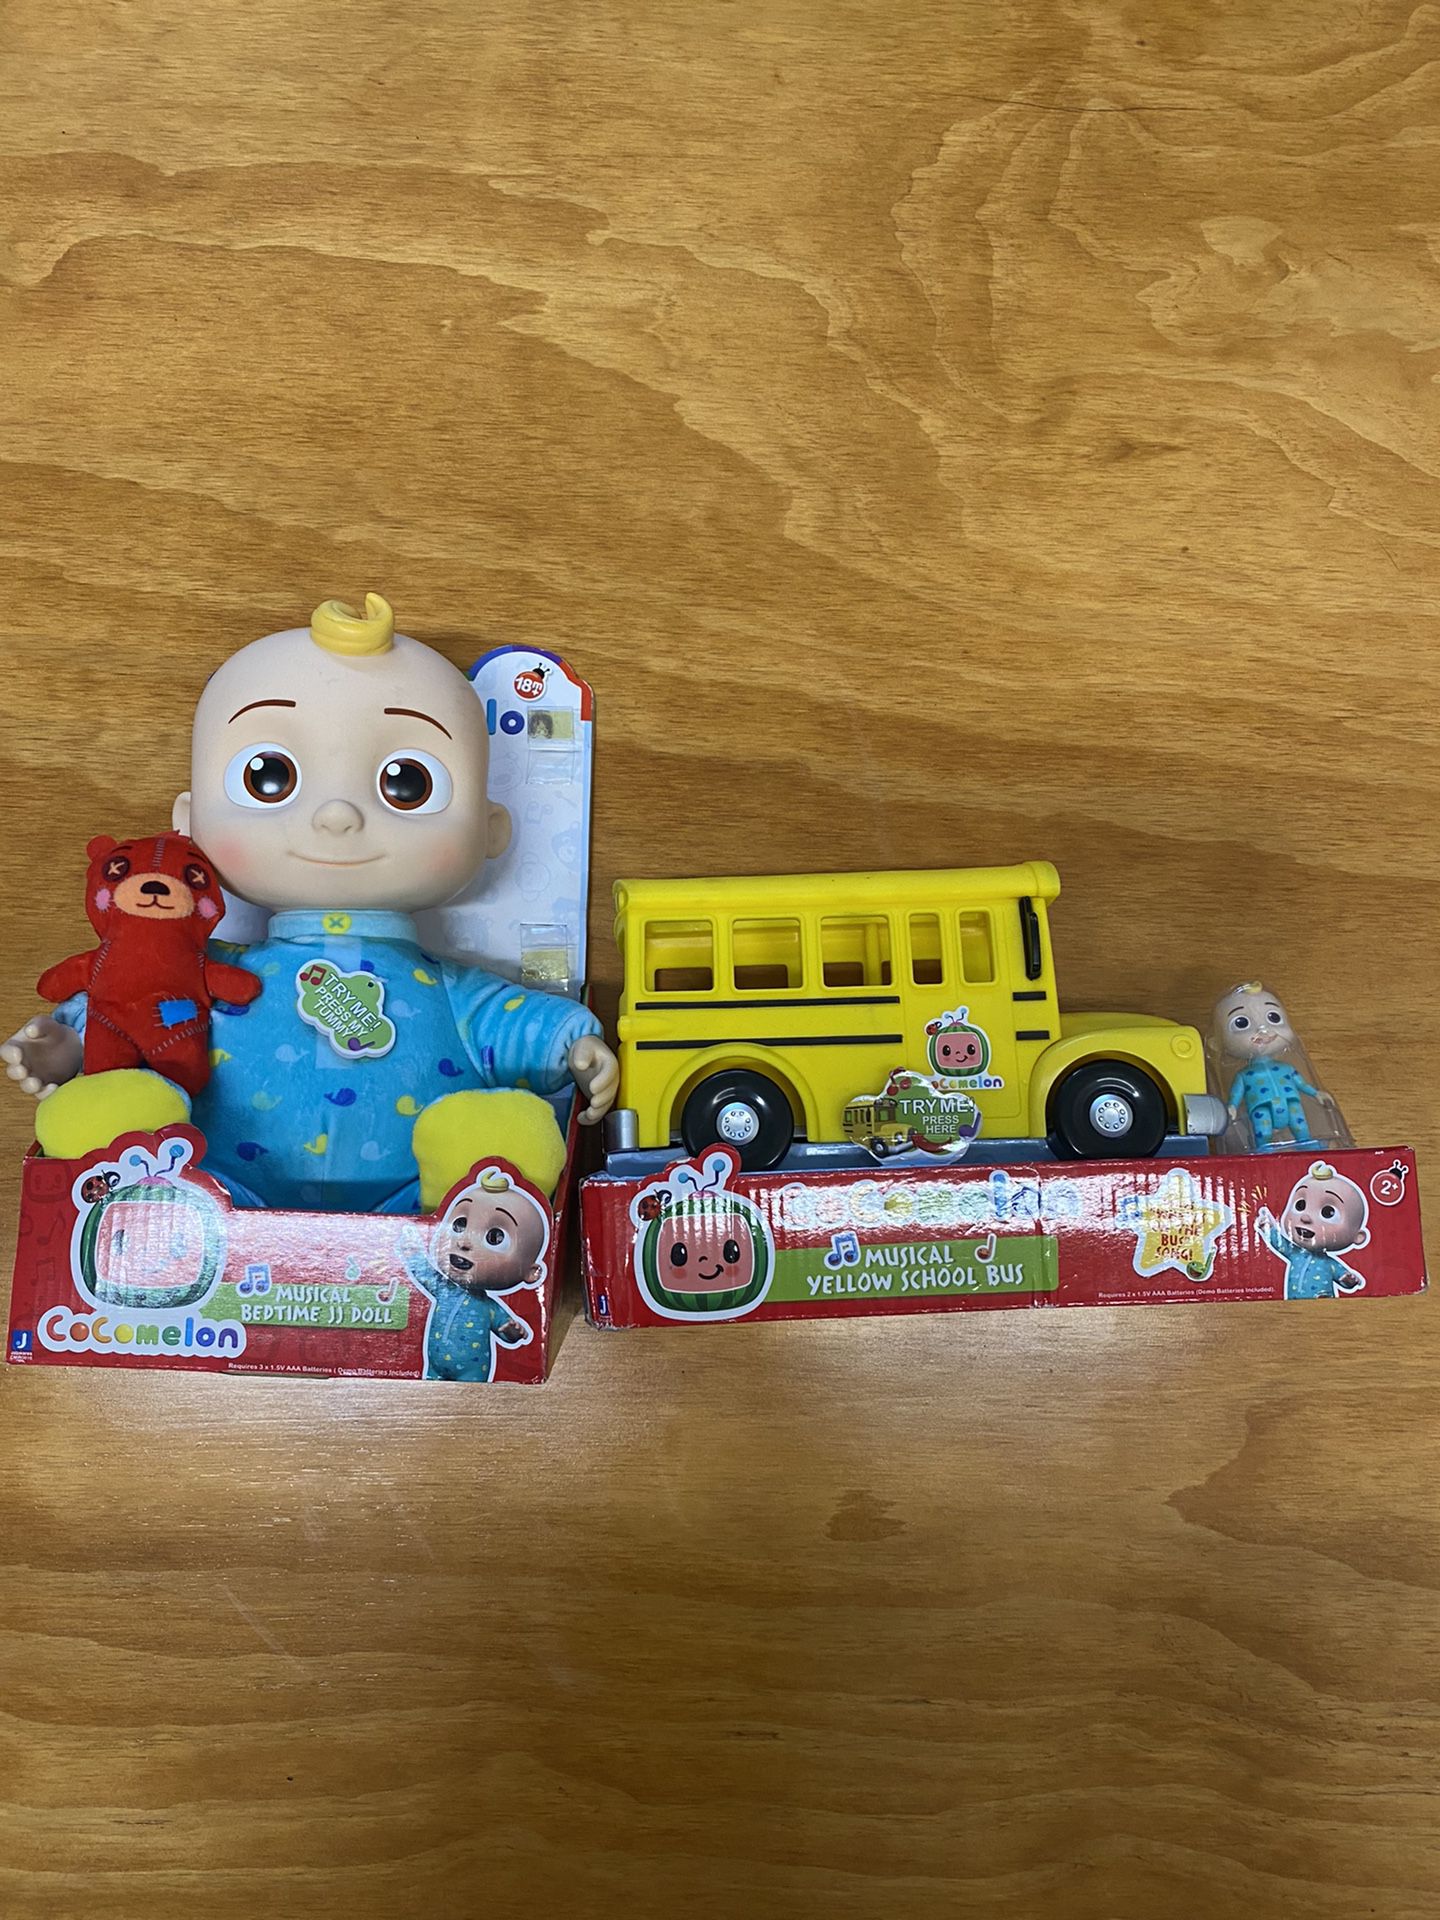 CoComelon Kids Music Toy Bundle with Piano keyboard for Sale in Fontana, CA  - OfferUp